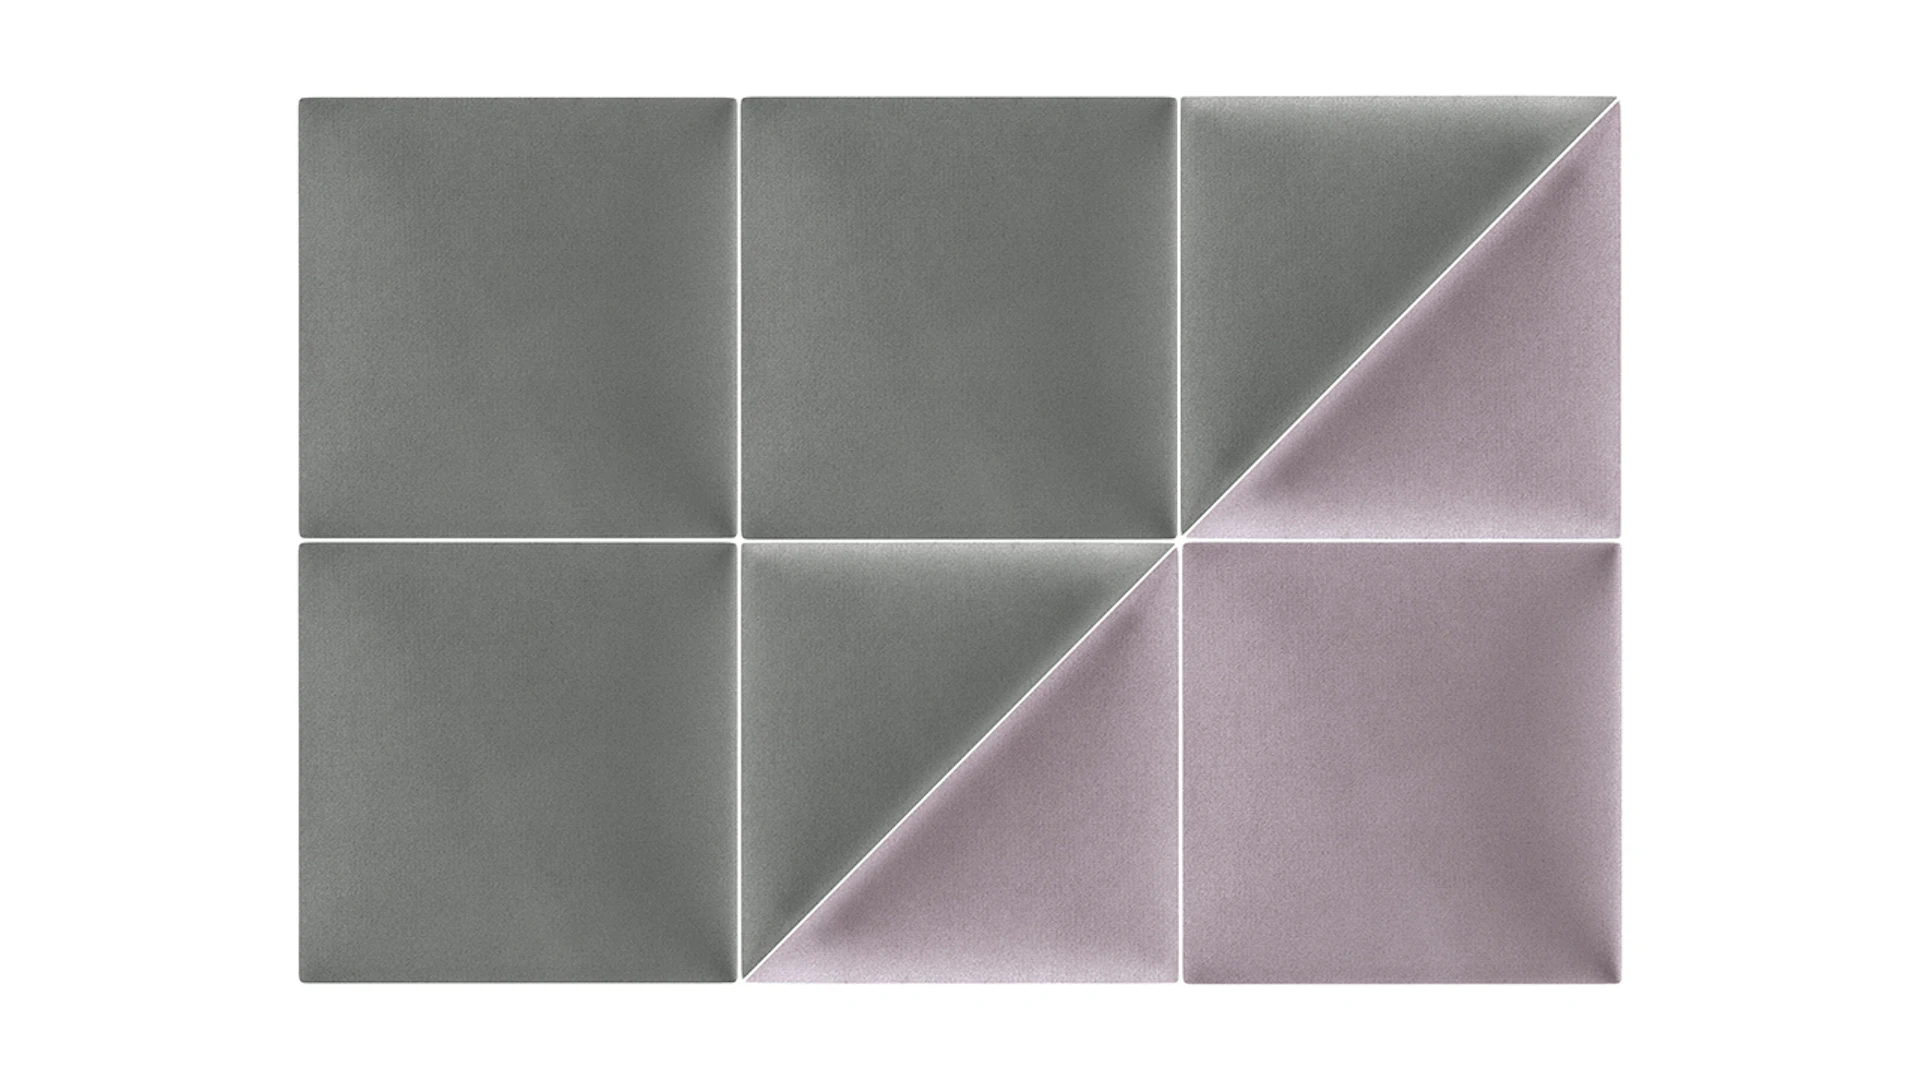 planeo ComfortWall - Acoustic wall cushion 30x30cm Pink triangle 2pcs.